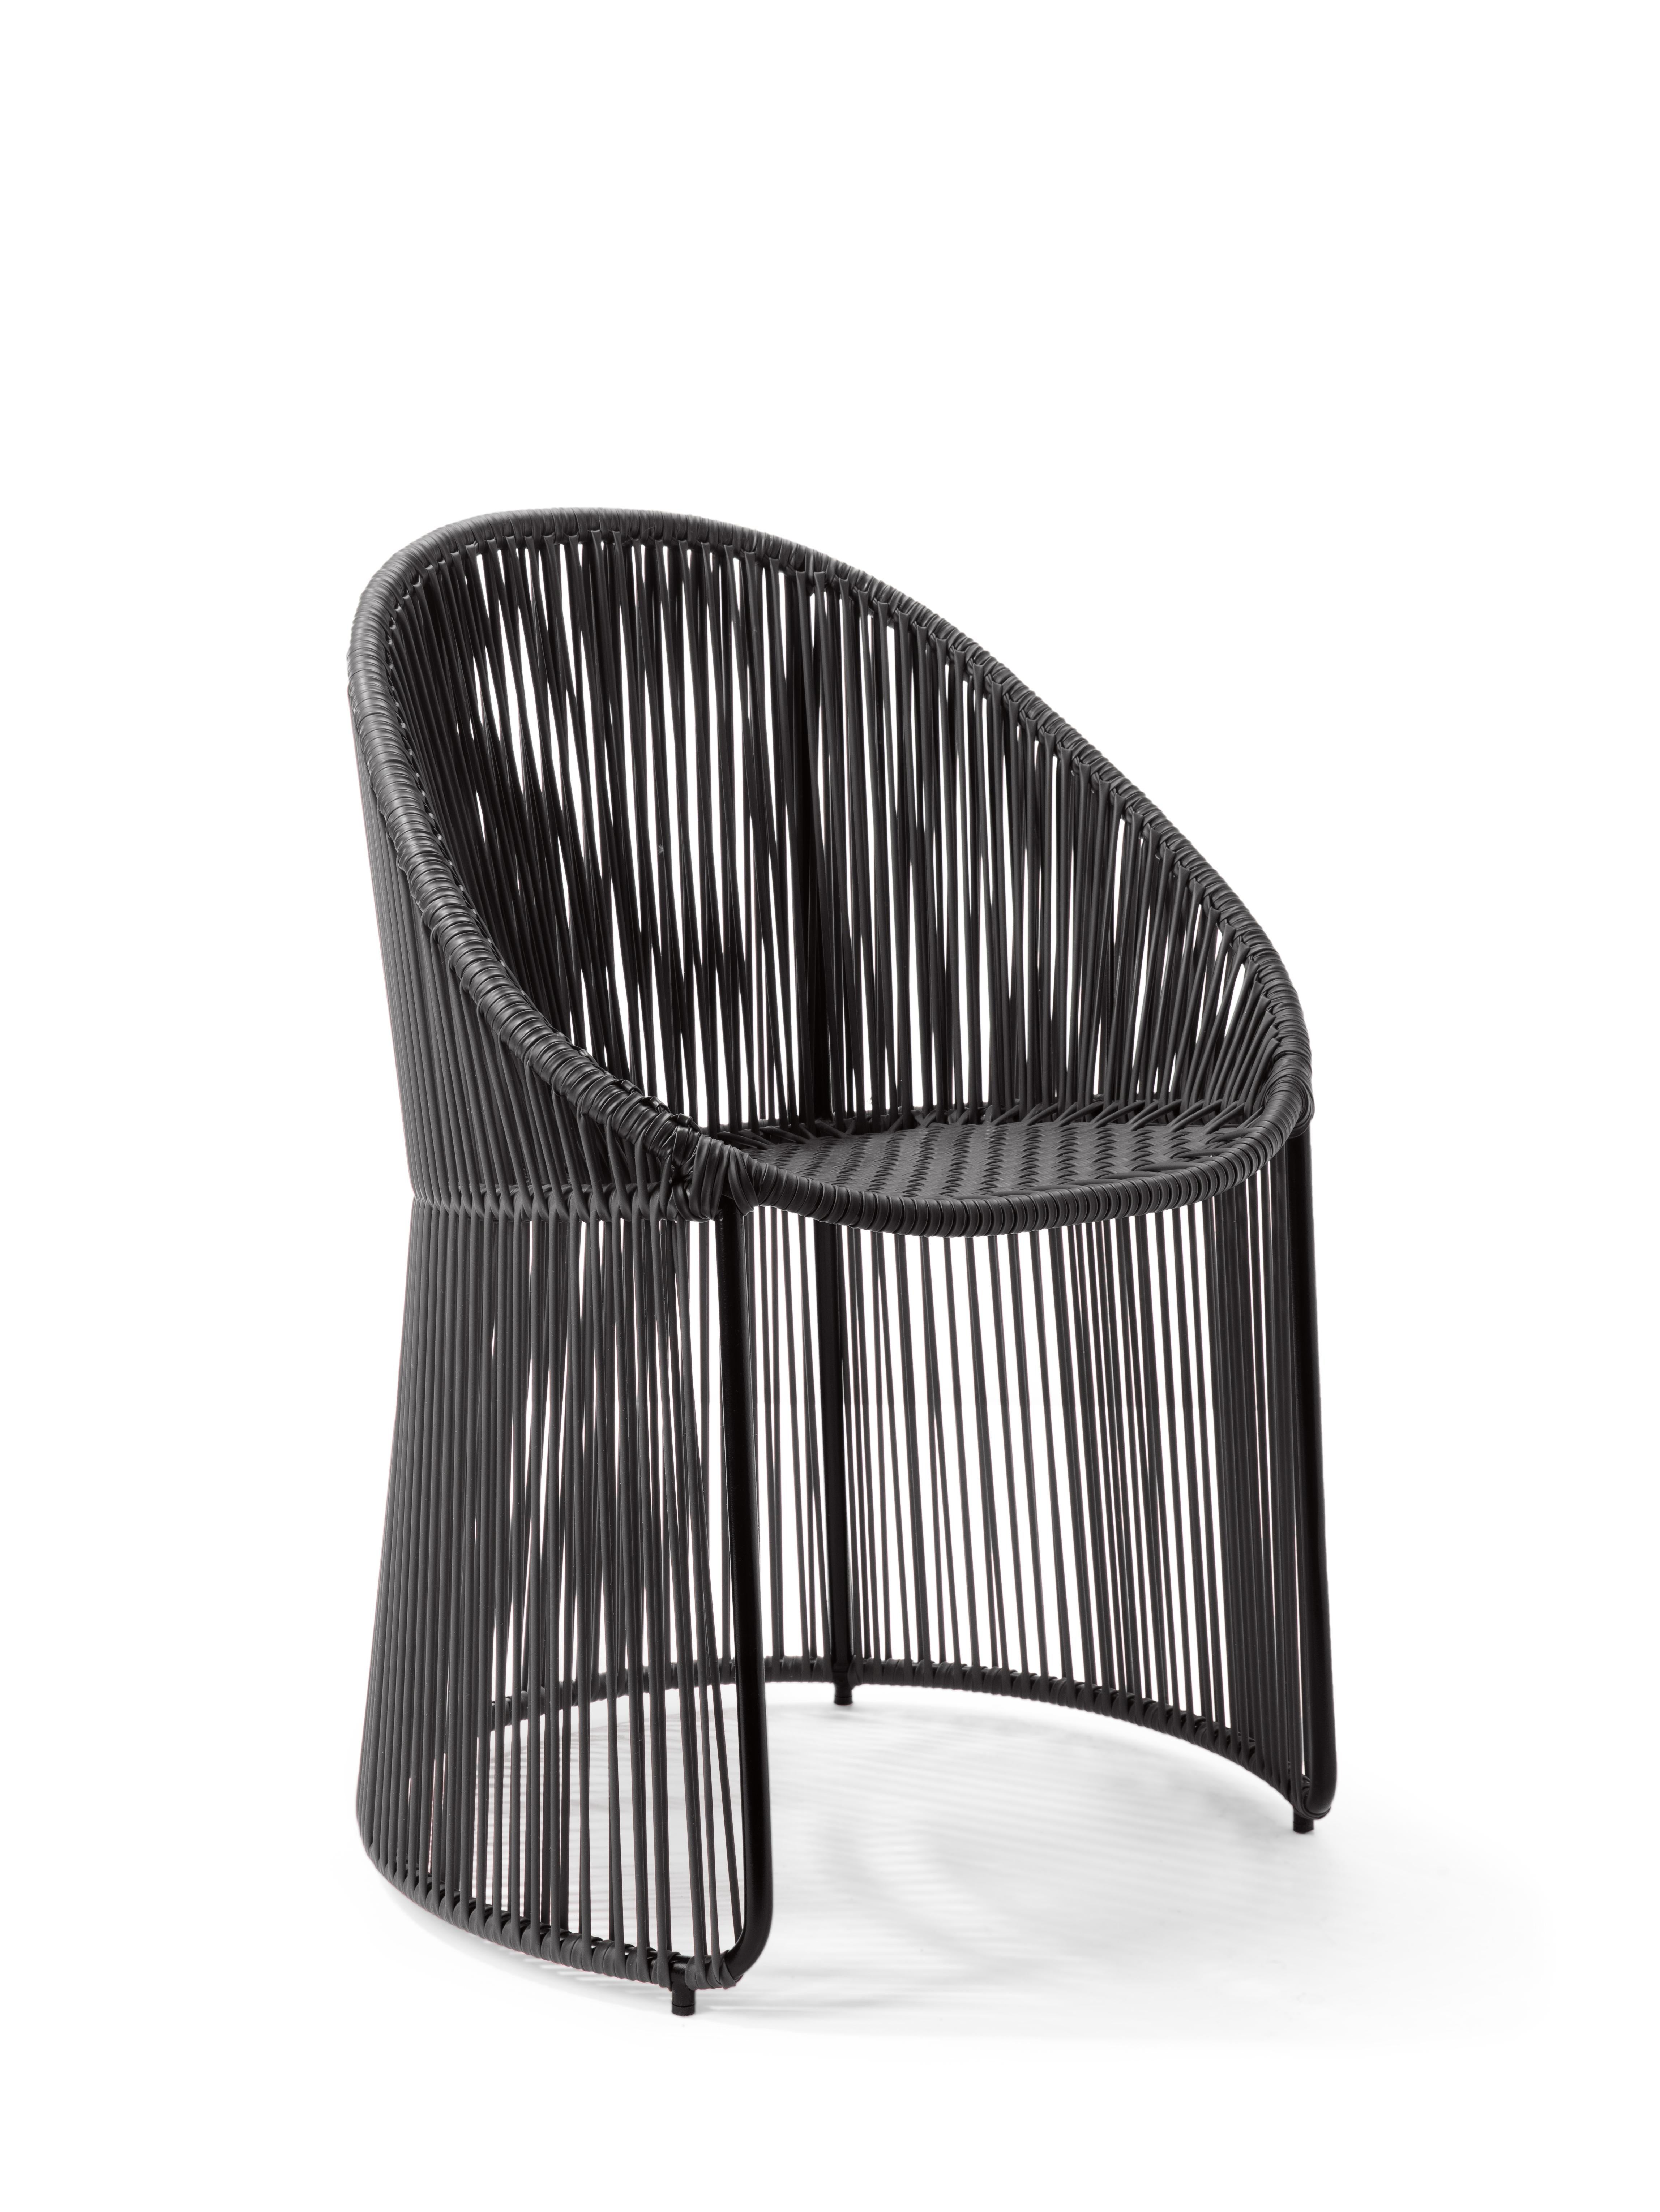 Set of 4 Black cartagenas dining chair by Sebastian Herkner
Materials: PVC strings. Galvanized and powder-coated tubular steel frame
Technique: made from recycled plastic. Weaved by local craftspeople in Colombia. 
Dimensions: W 60.2 x D 53.8 x H